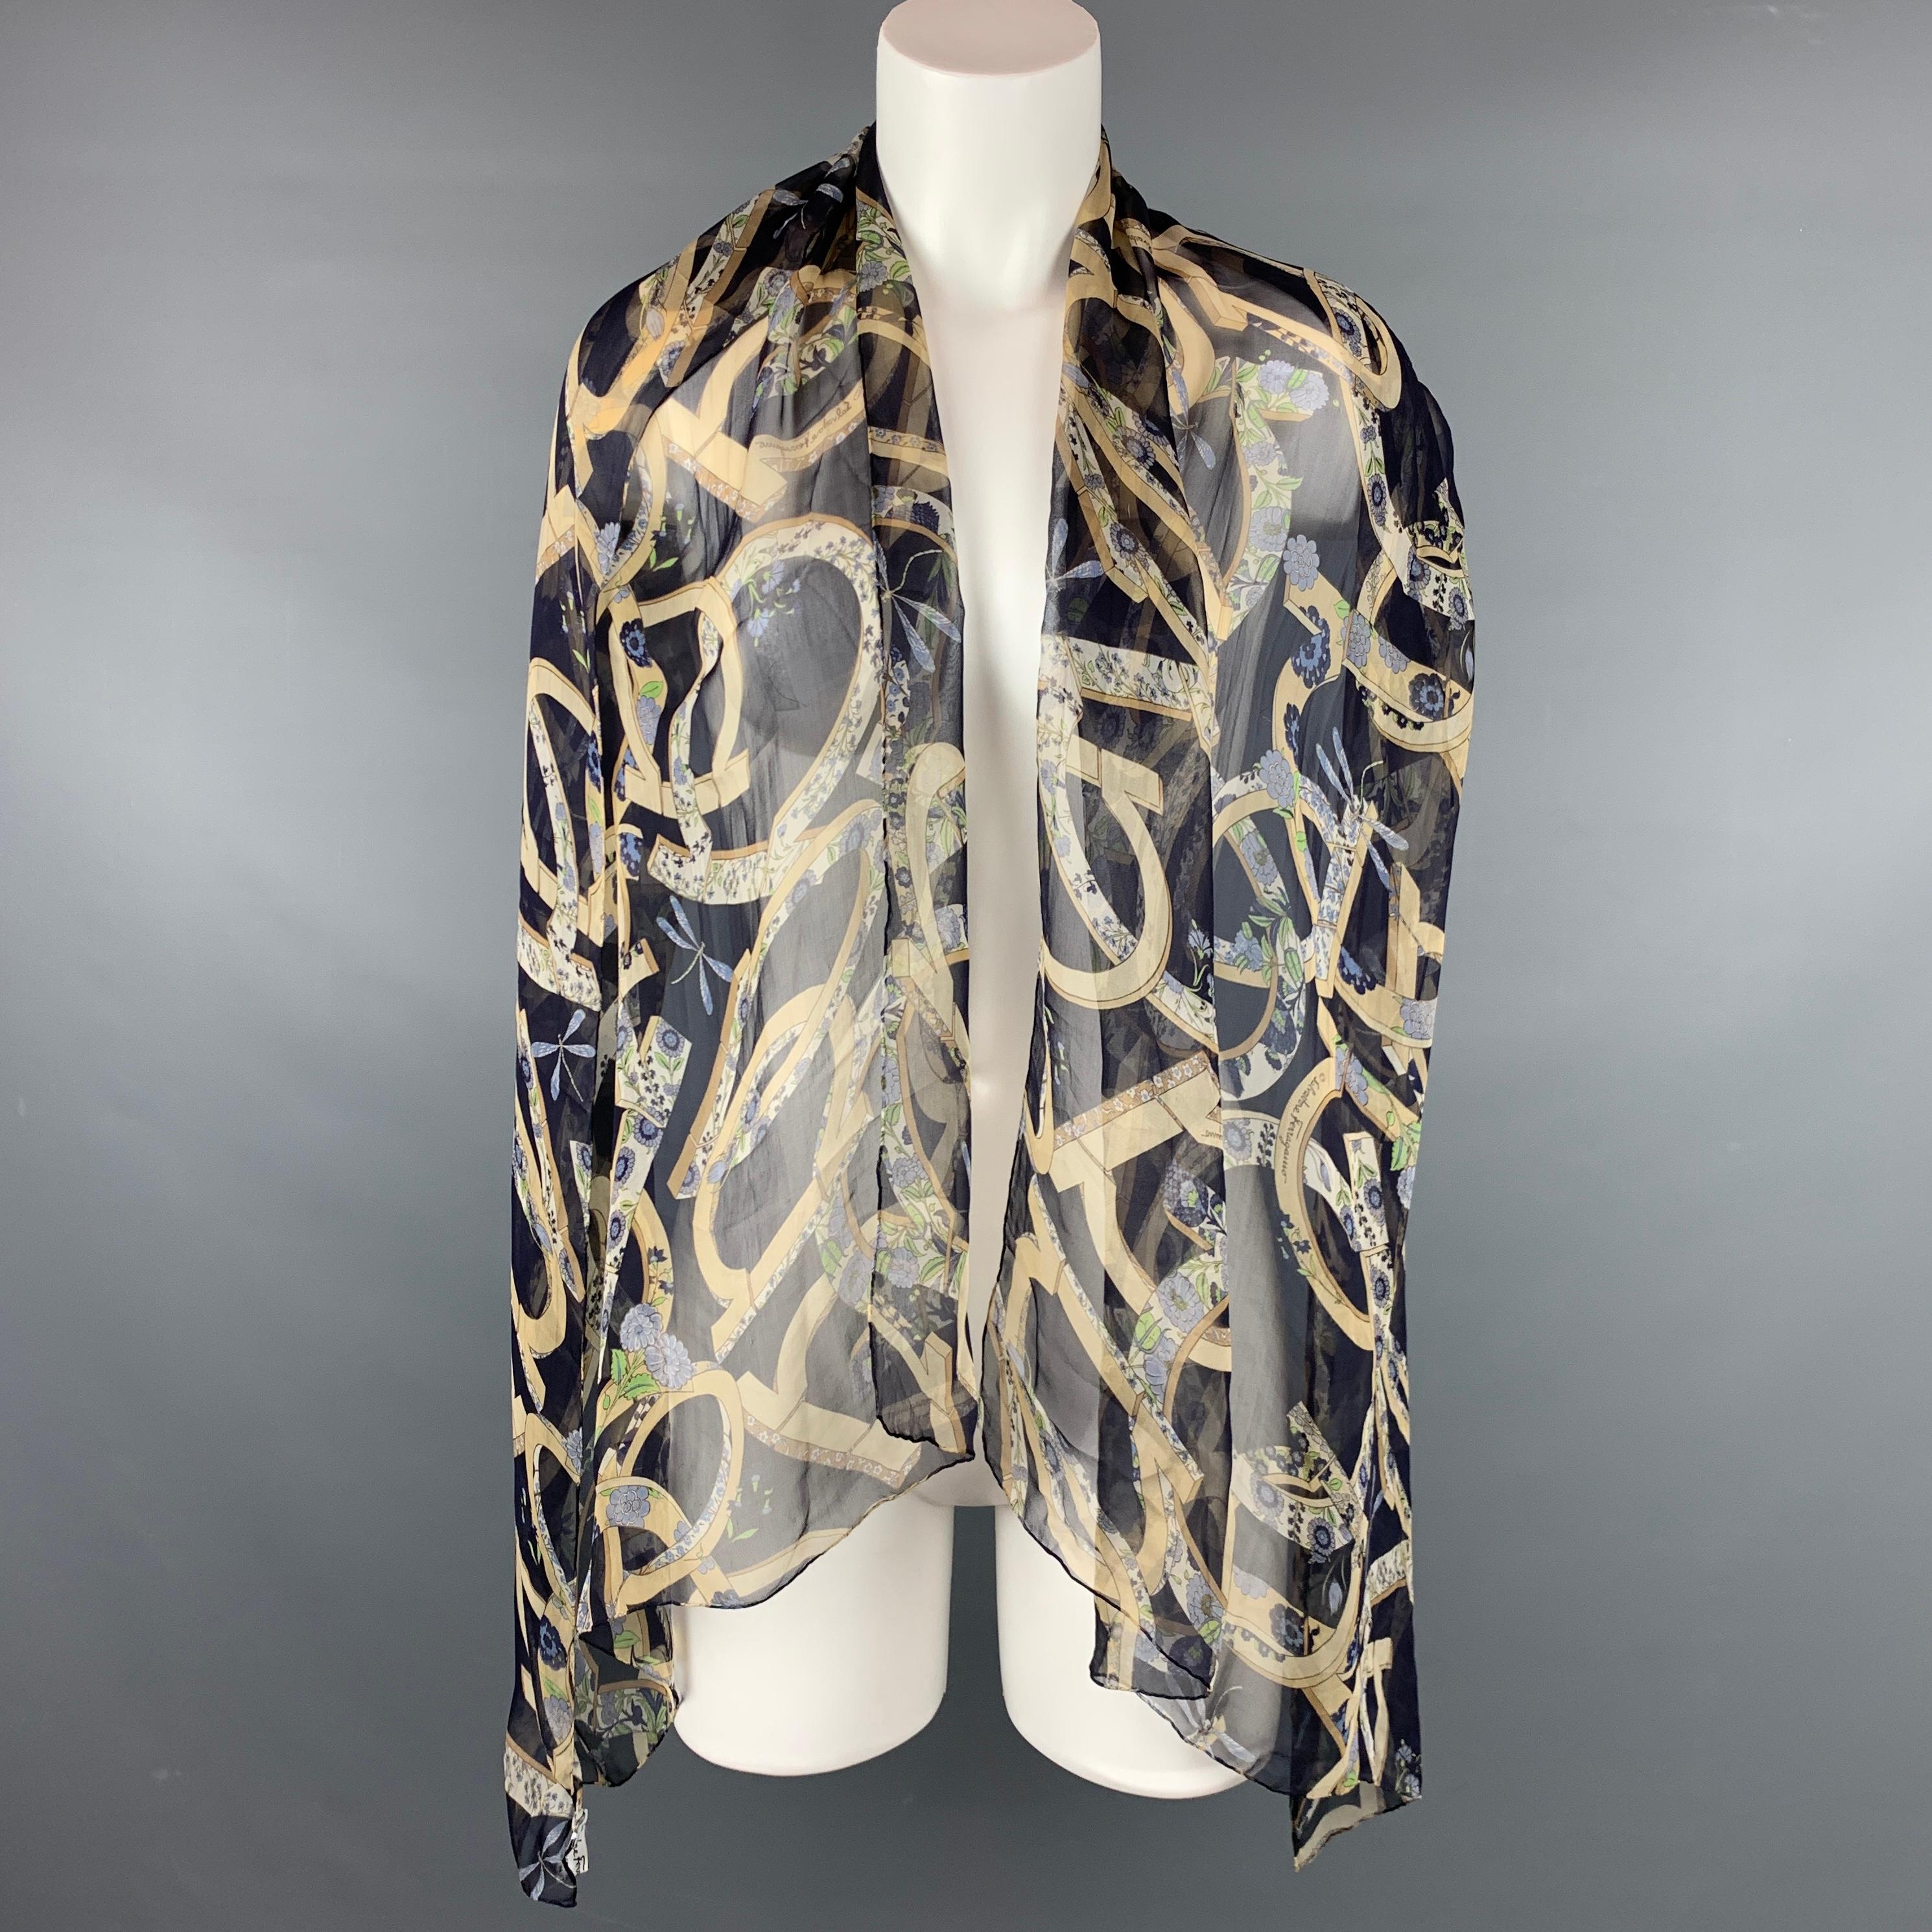 SALVATORE FERRAGAMO scarf comes in a navy & beige floral chiffon silk. Made in Italy.

Very Good Pre-Owned Condition.

Measurements:

27 in. x 70 in. 